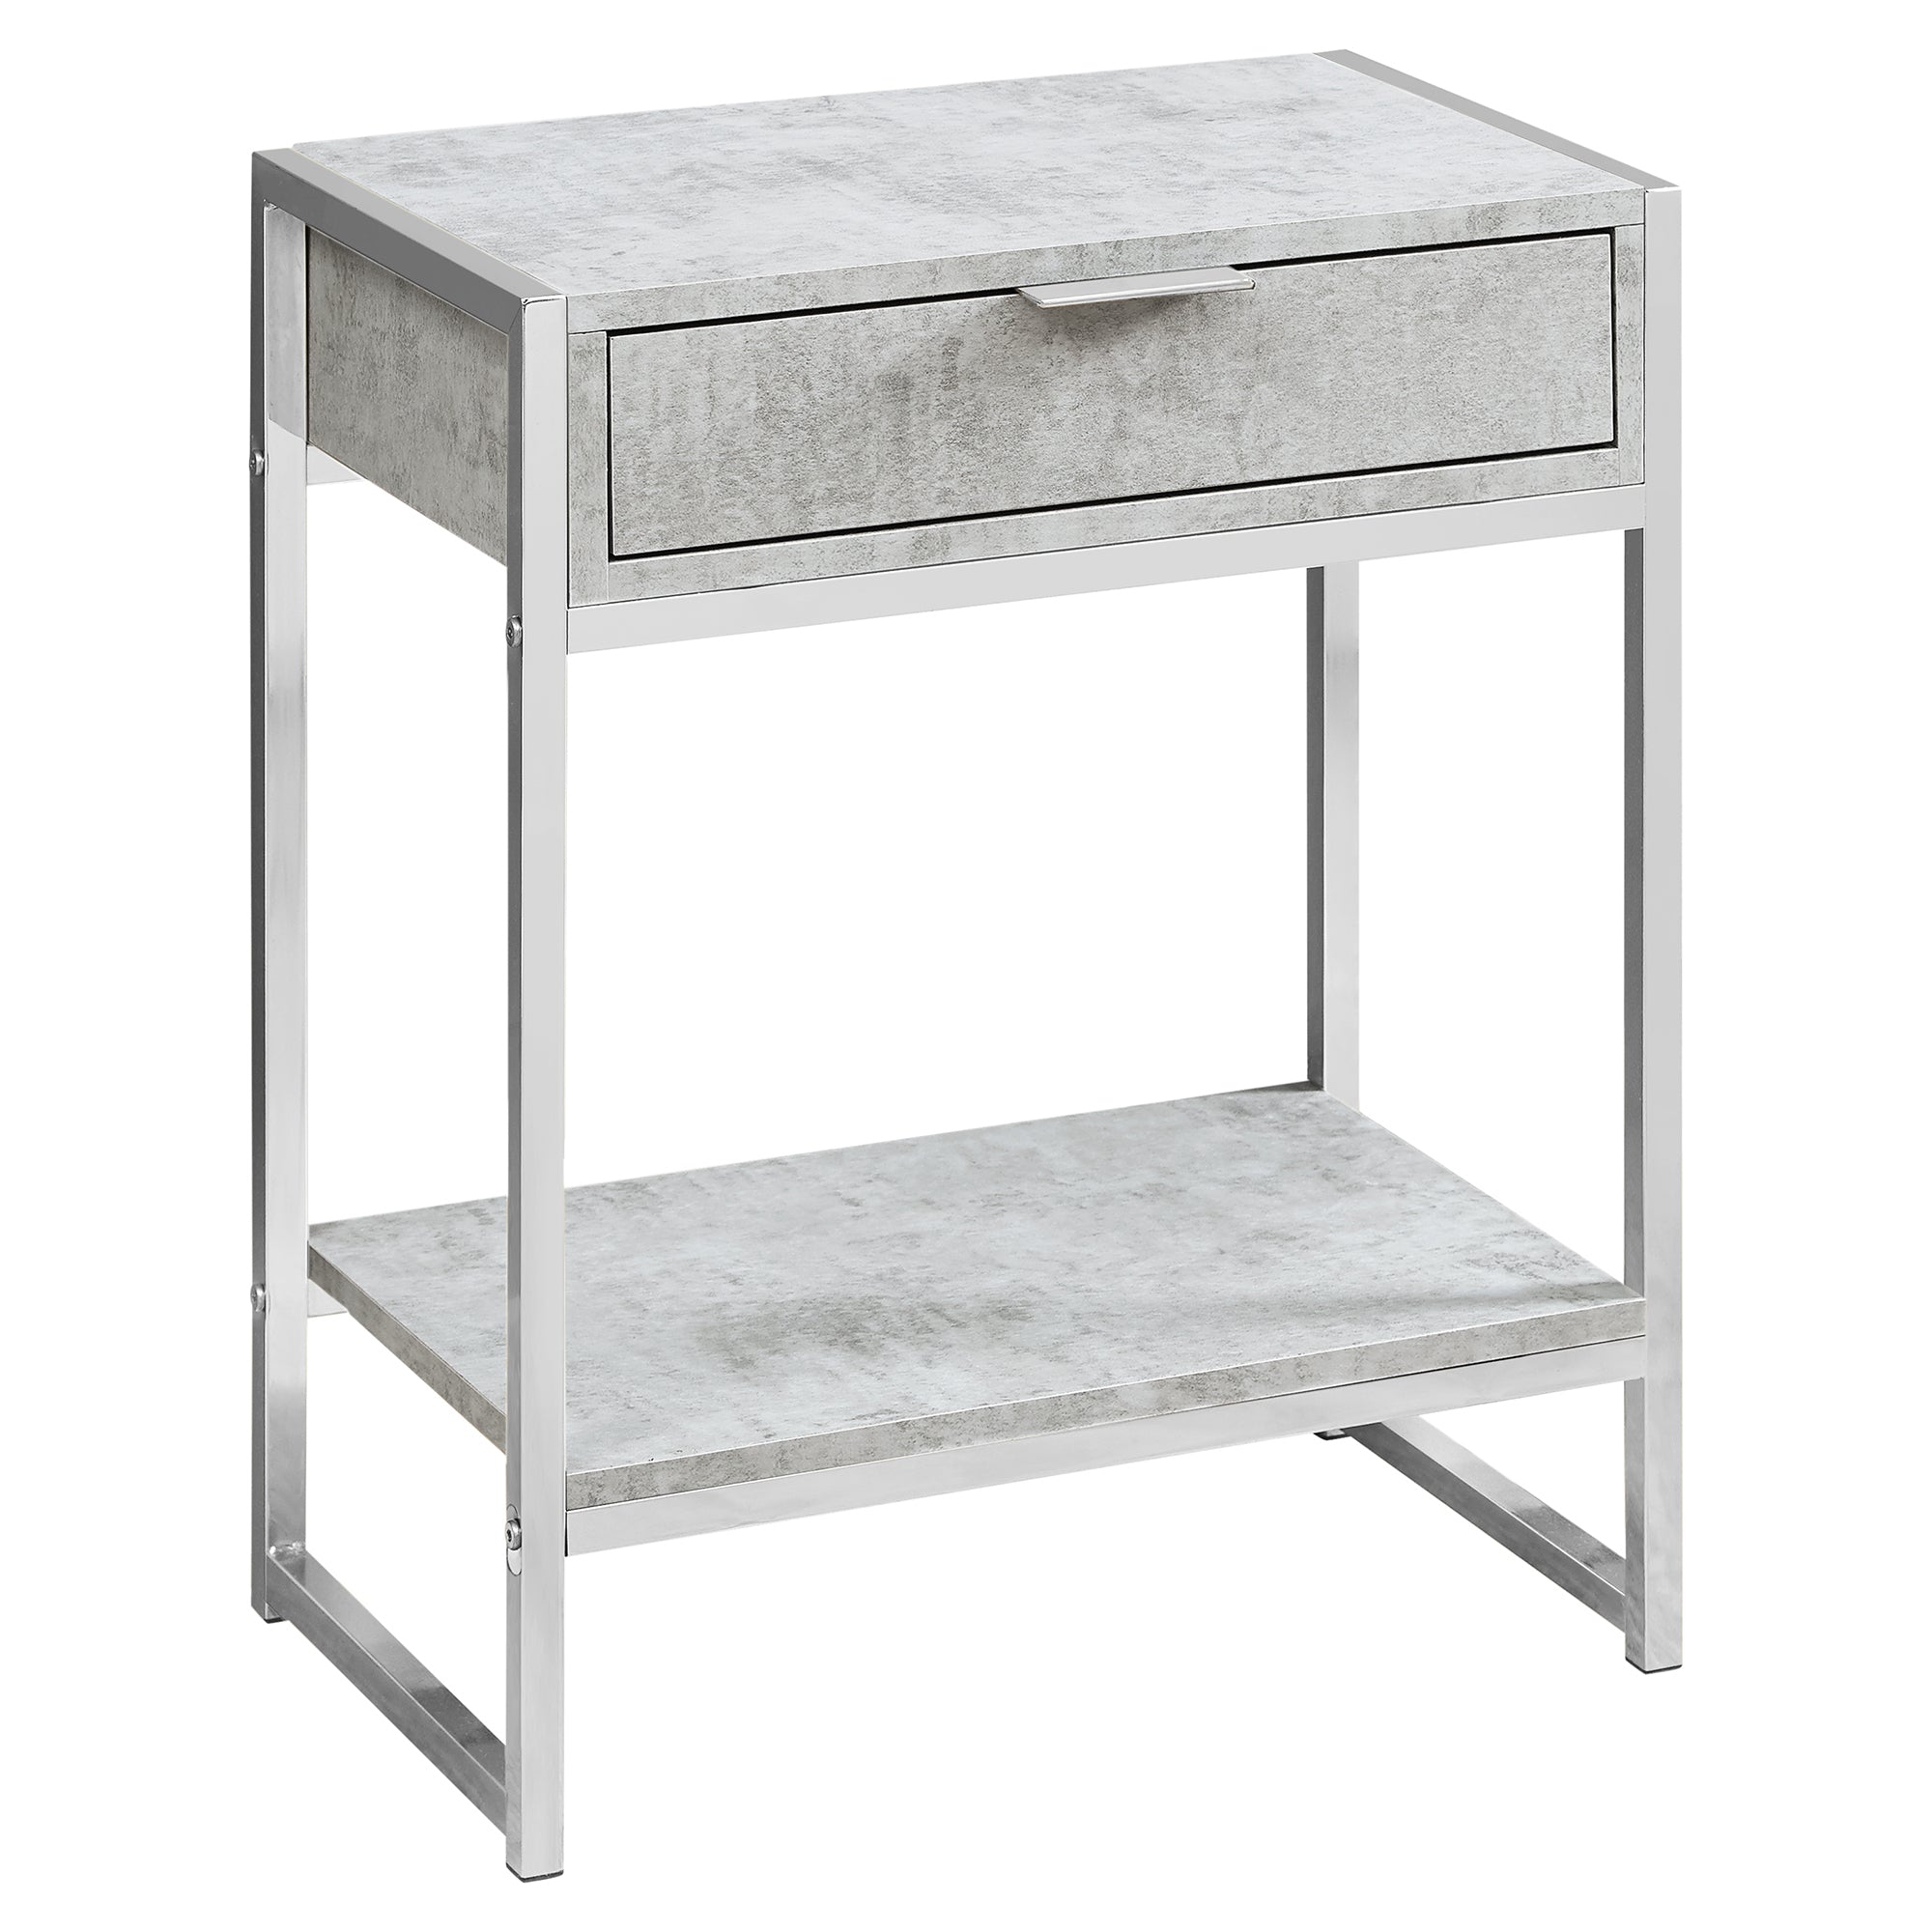 MN-893481    Accent Table, Side, End, Nightstand, Lamp, Living Room, Bedroom, Metal Legs, Laminate, Grey Cement Look, Chrome, Contemporary, Modern